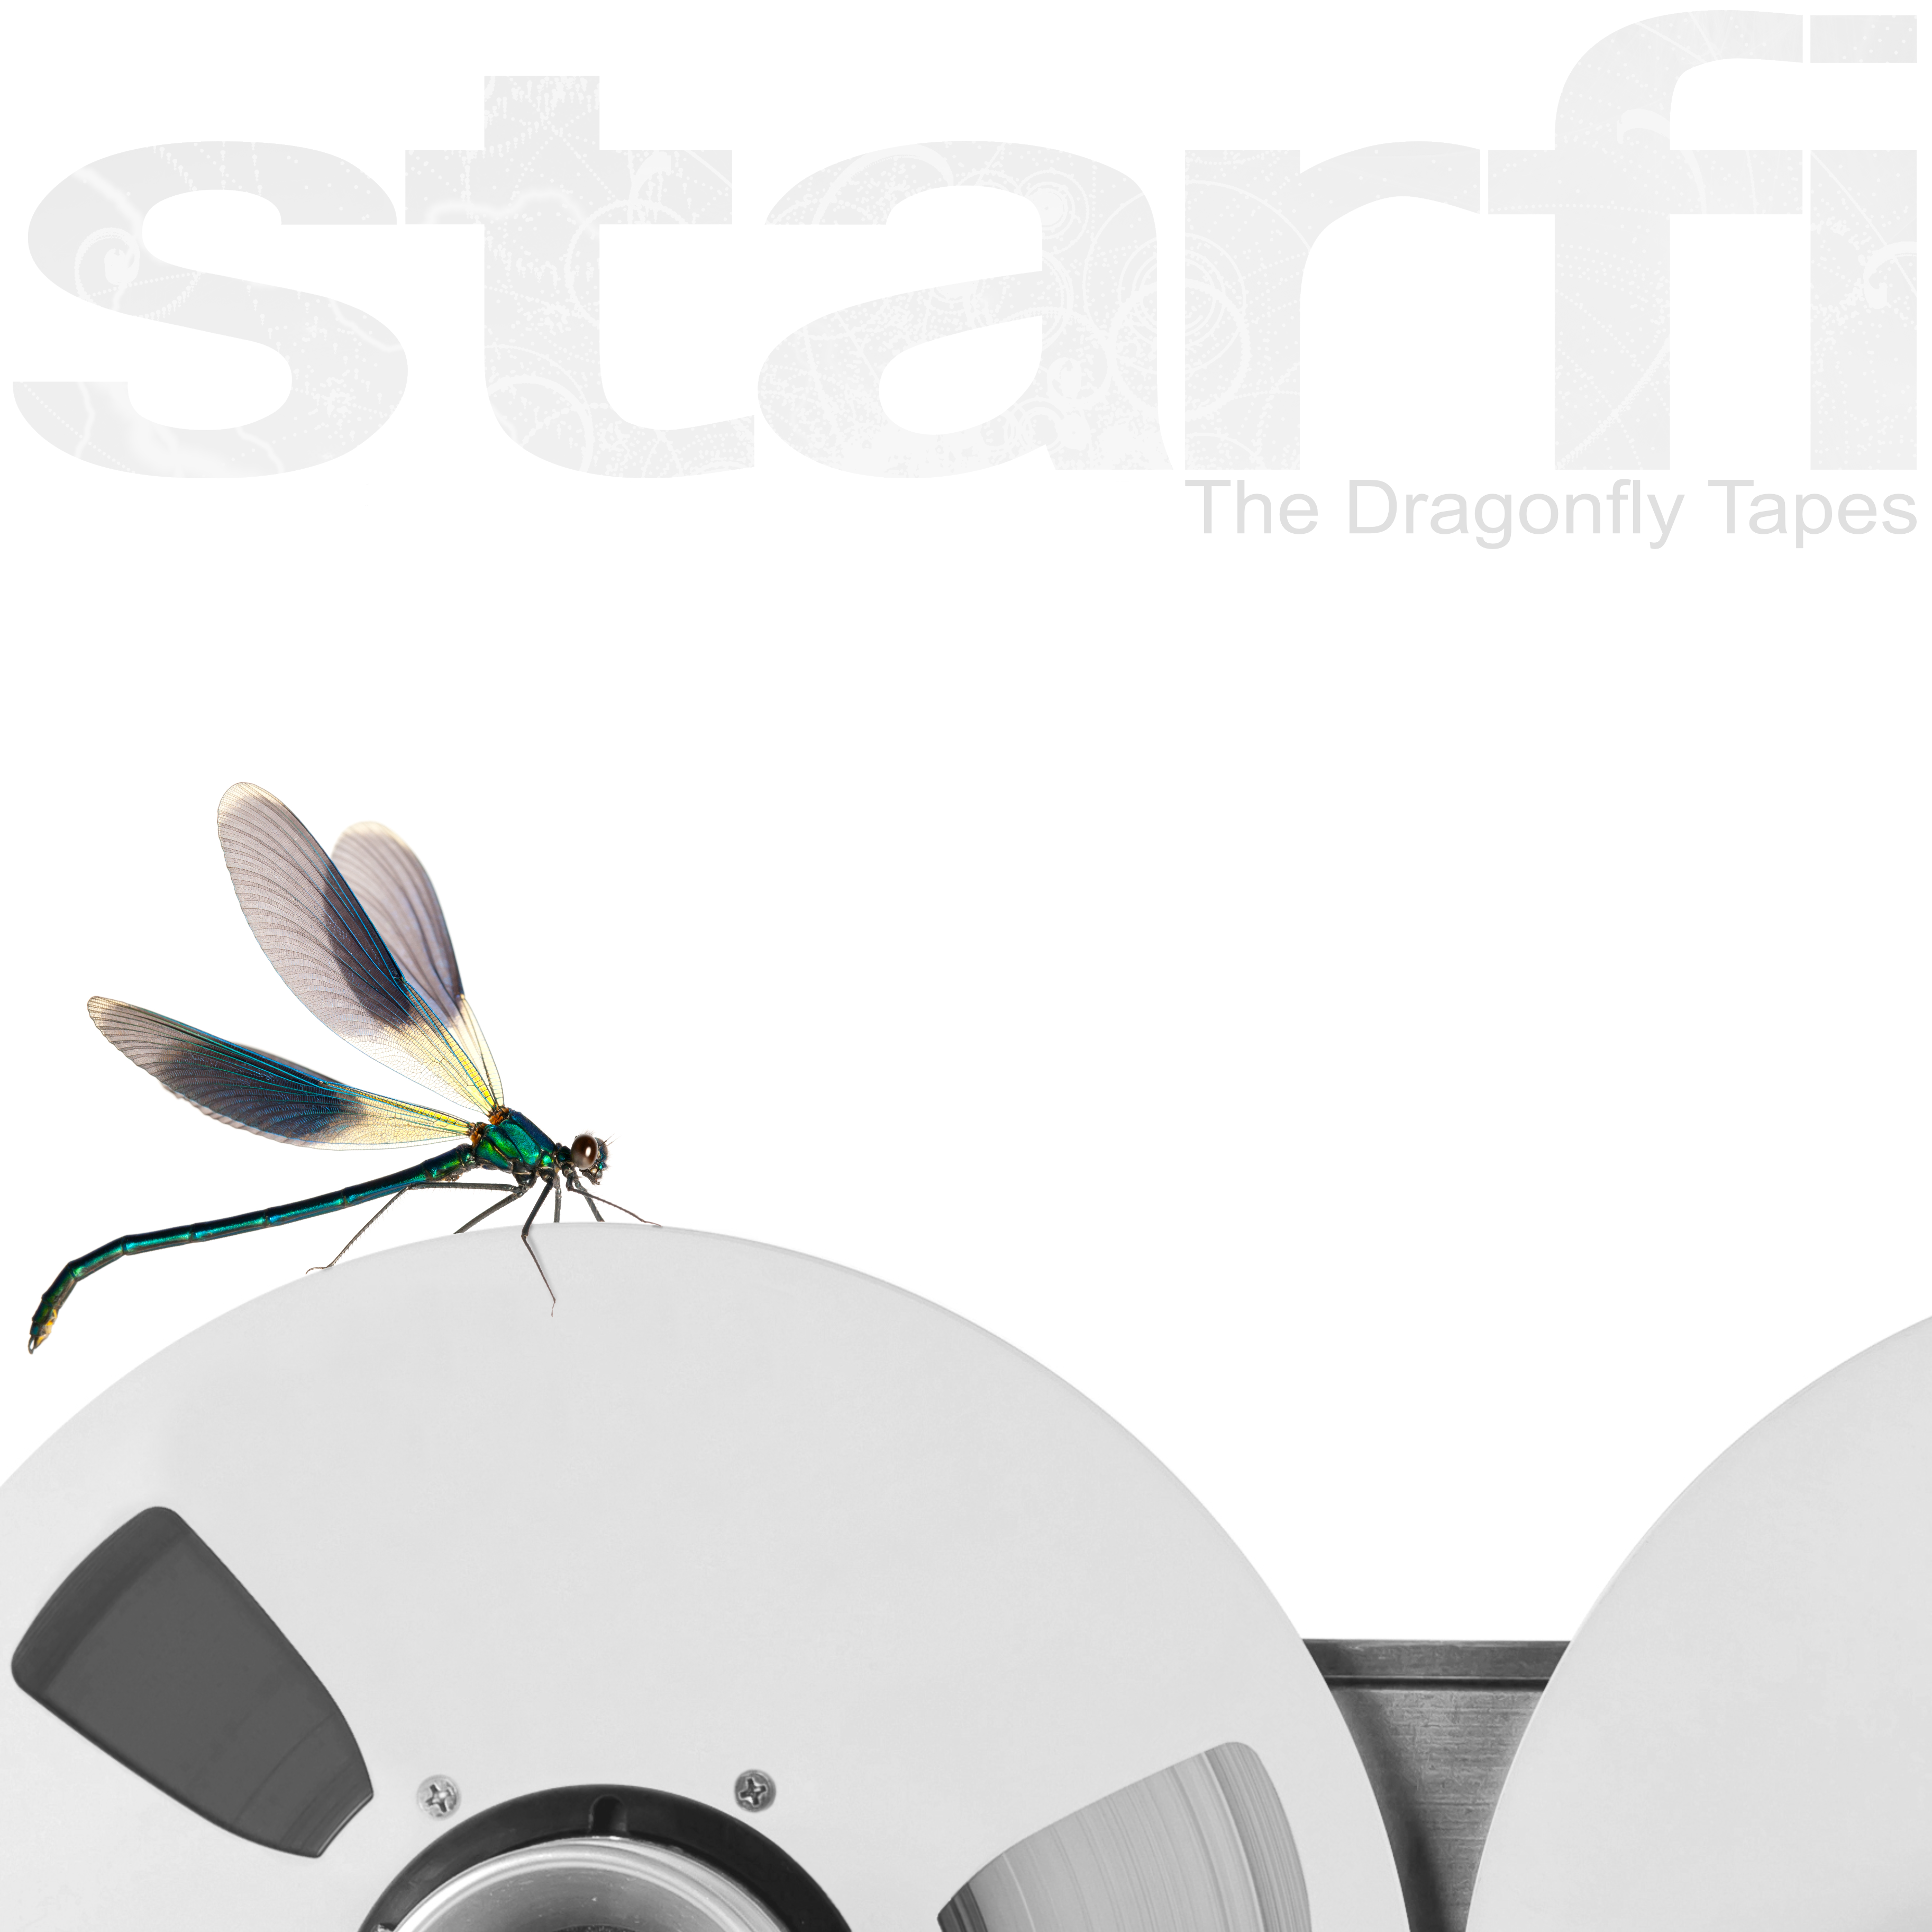 Starfi "The Dragonfly Tapes"